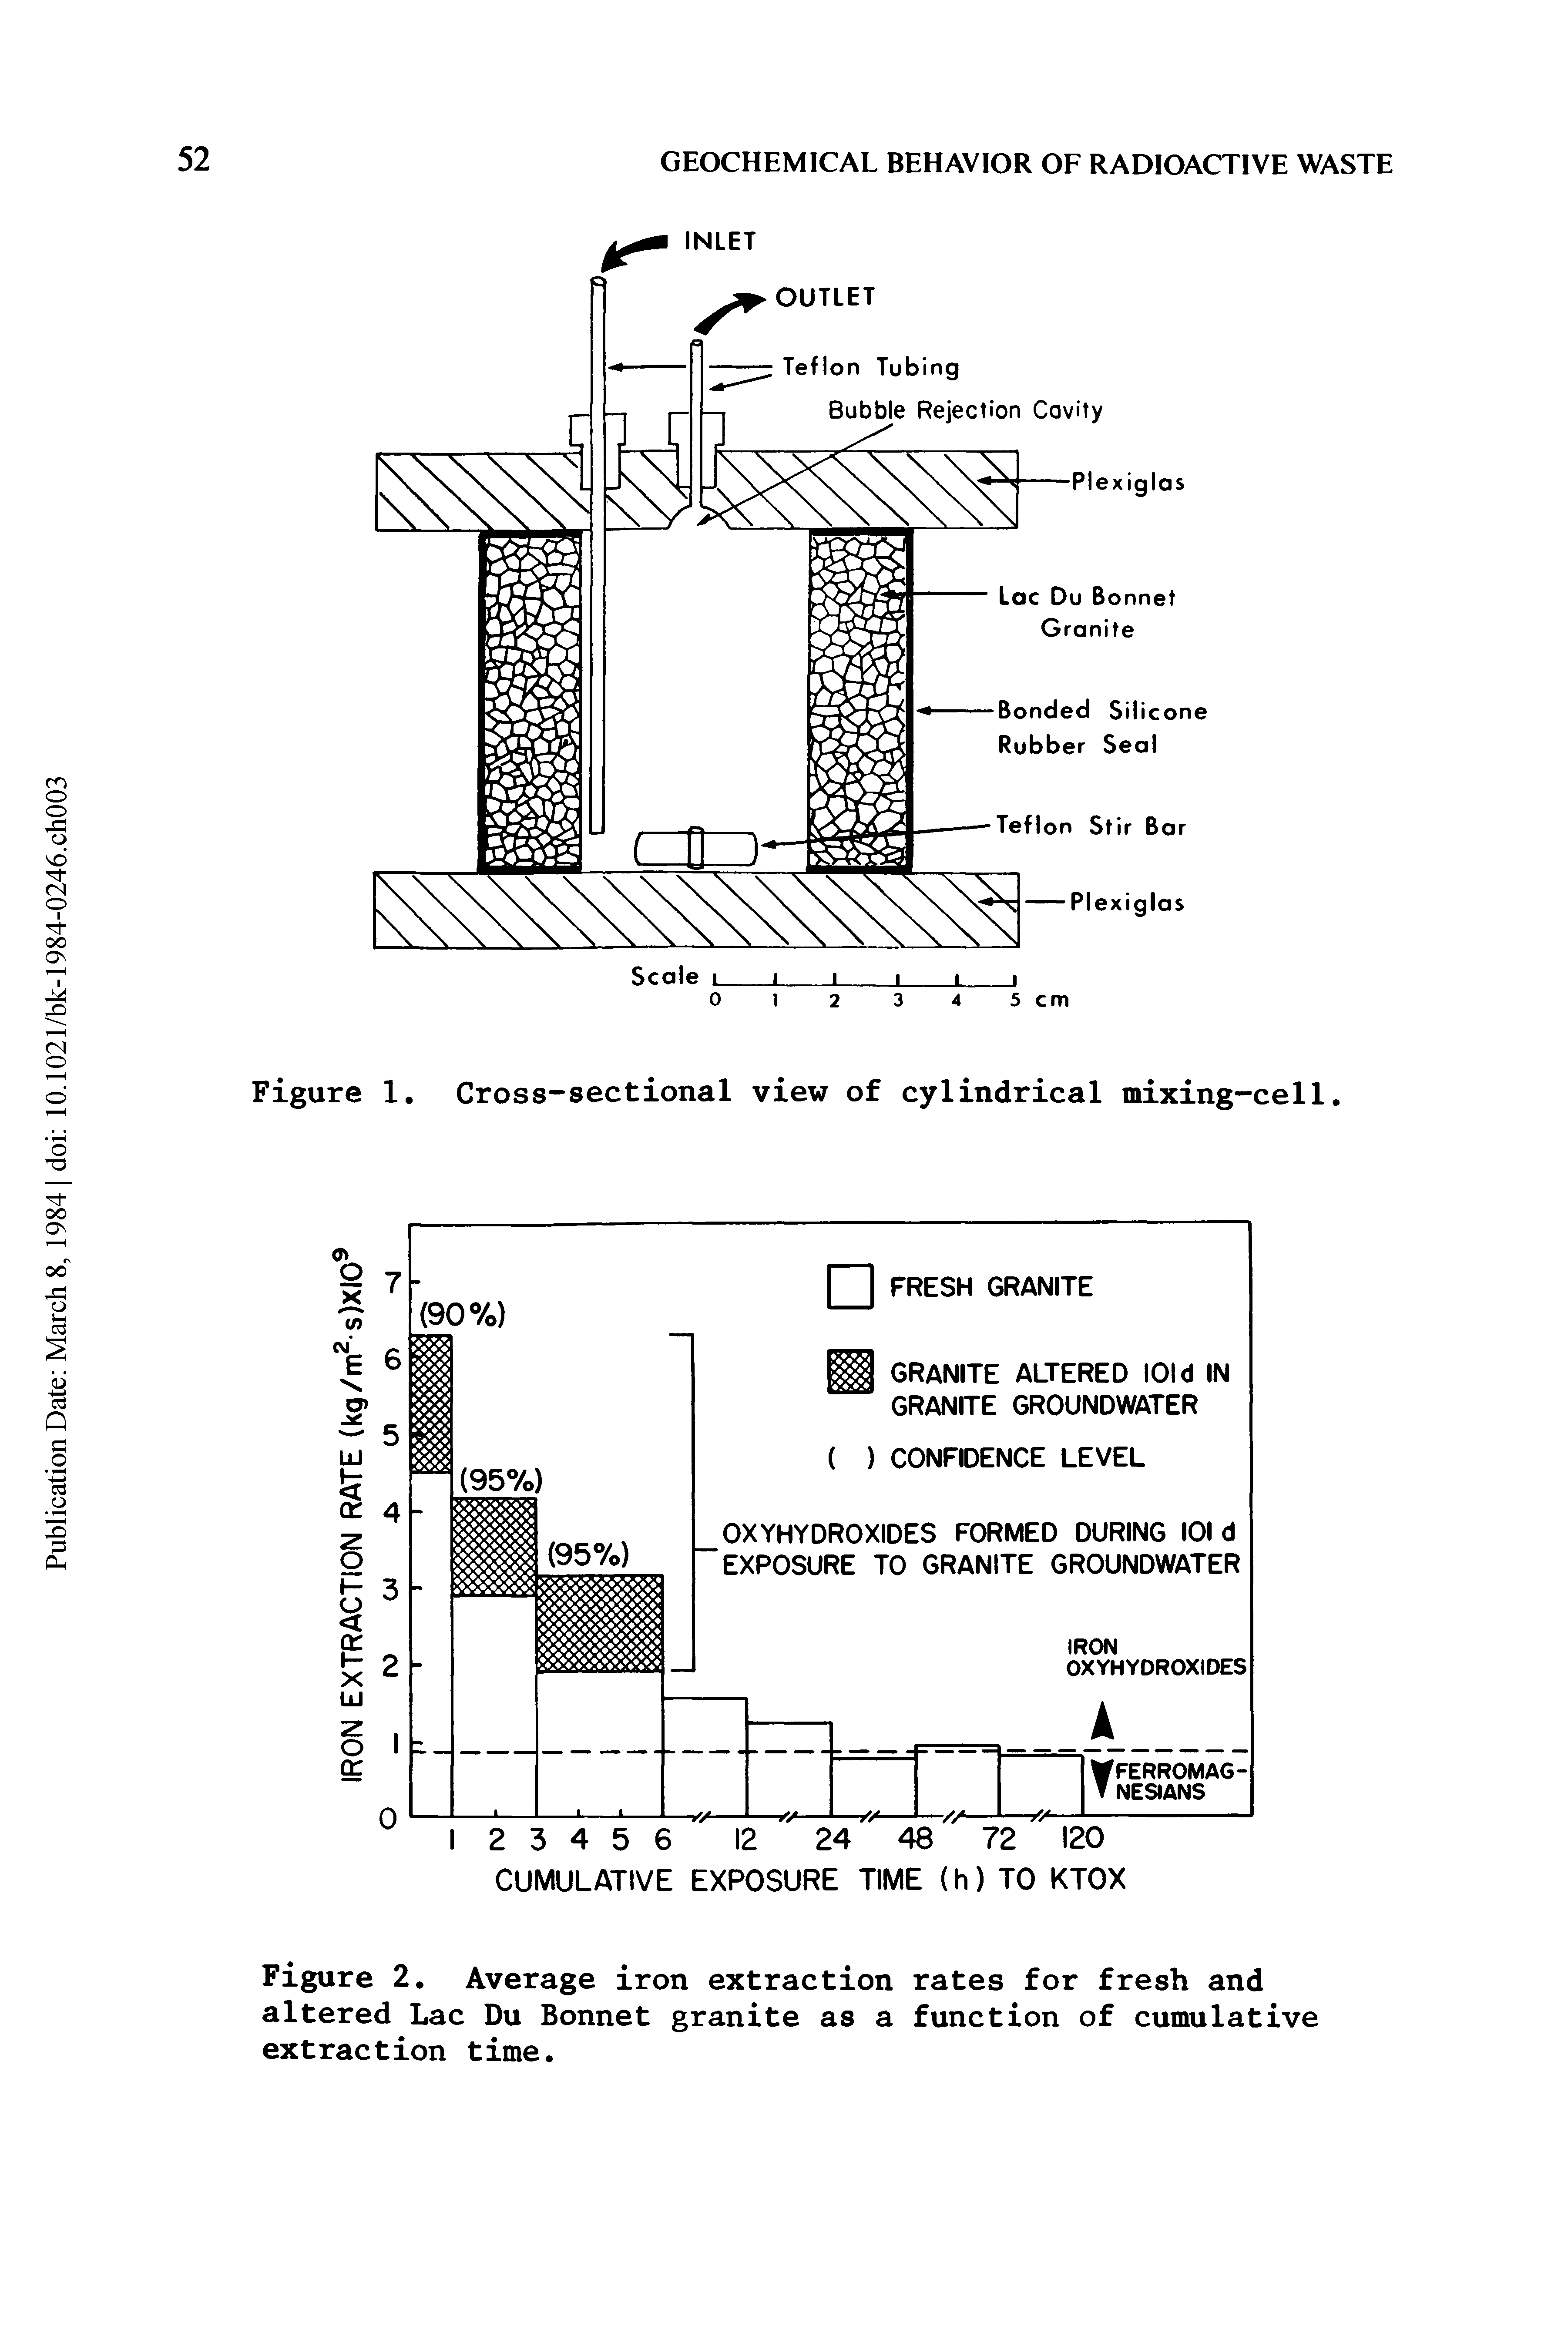 Figure 2. Average iron extraction rates for fresh and altered Lac Du Bonnet granite as a function of cumulative extraction time.